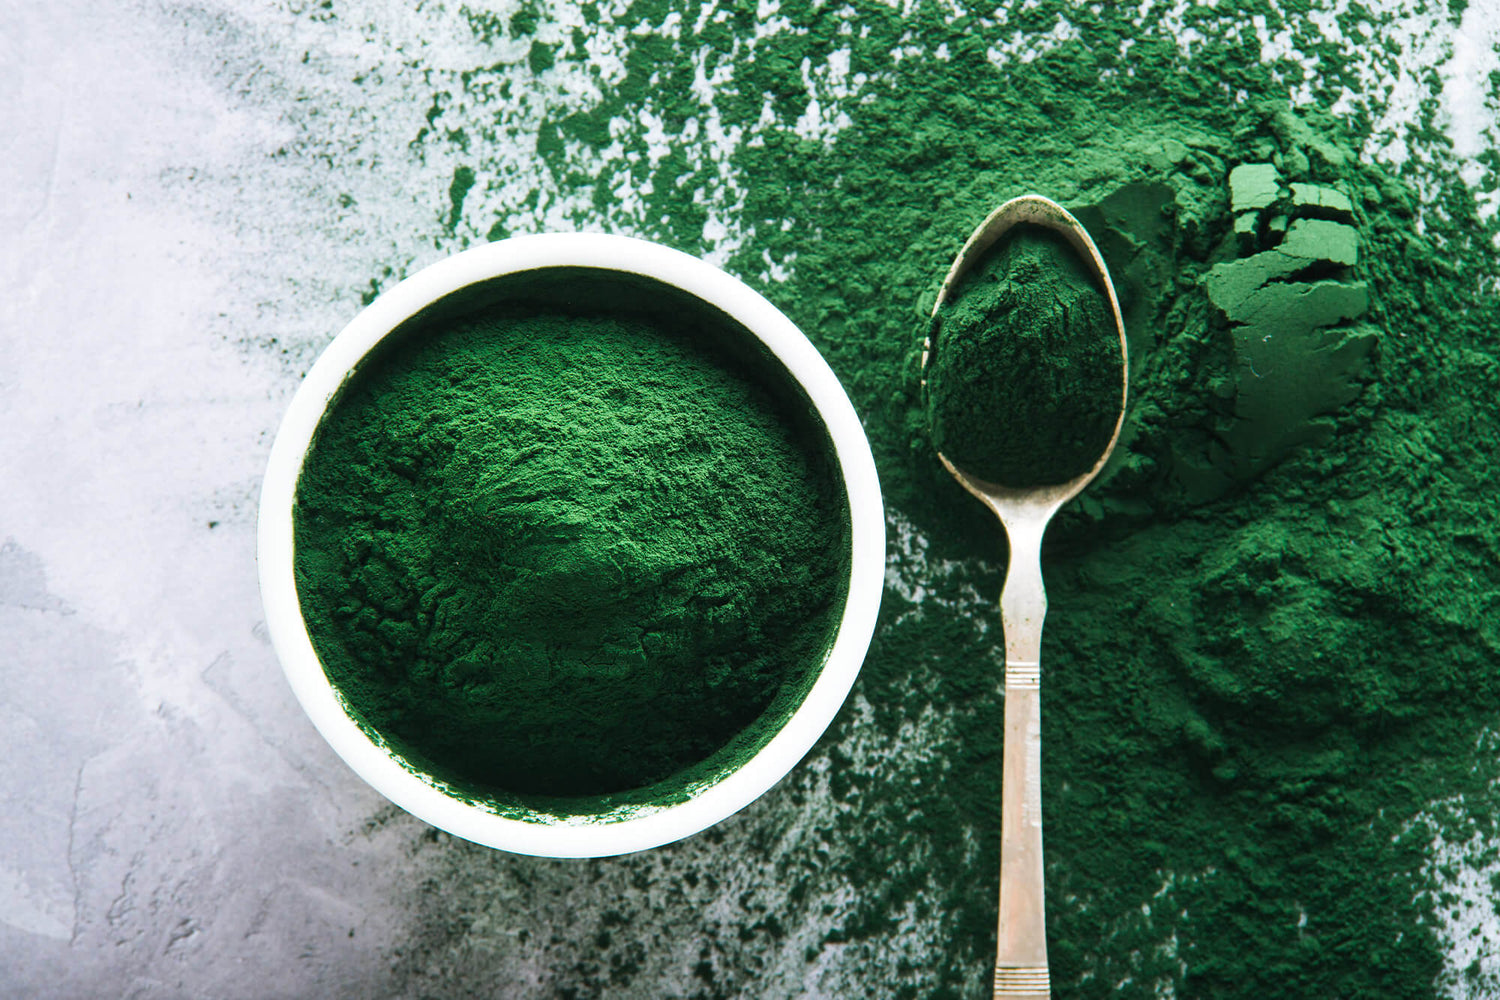  Bowl of vibrant green spirulina powder next to a spoonful of spirulina powder on a textured surface.